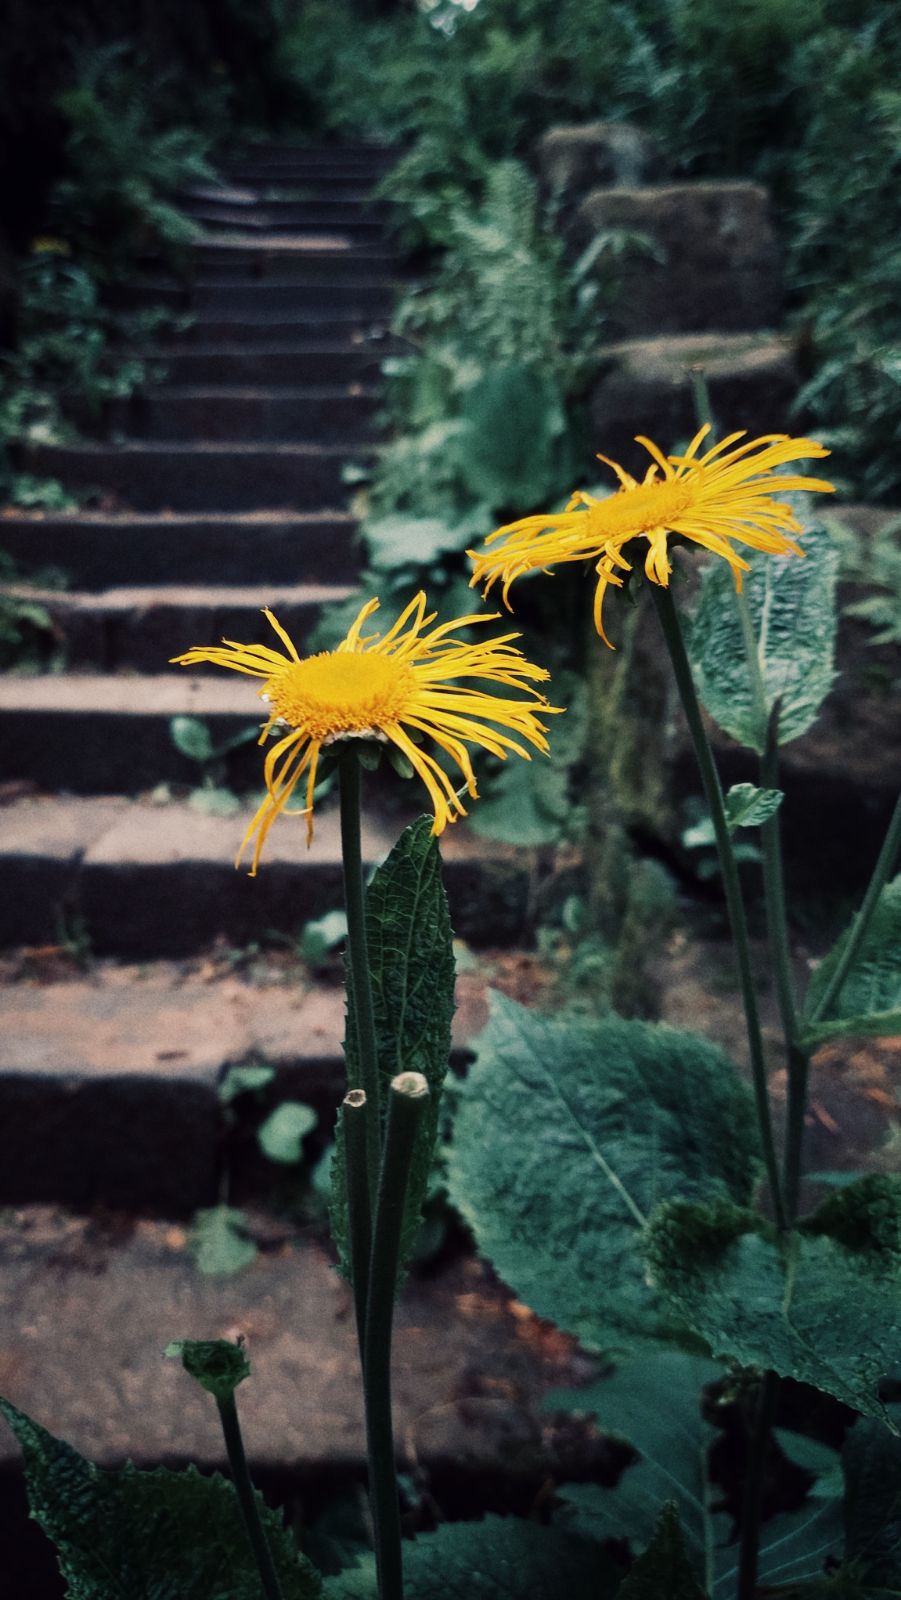 Two yellow flowers in front of dark steep stairs.